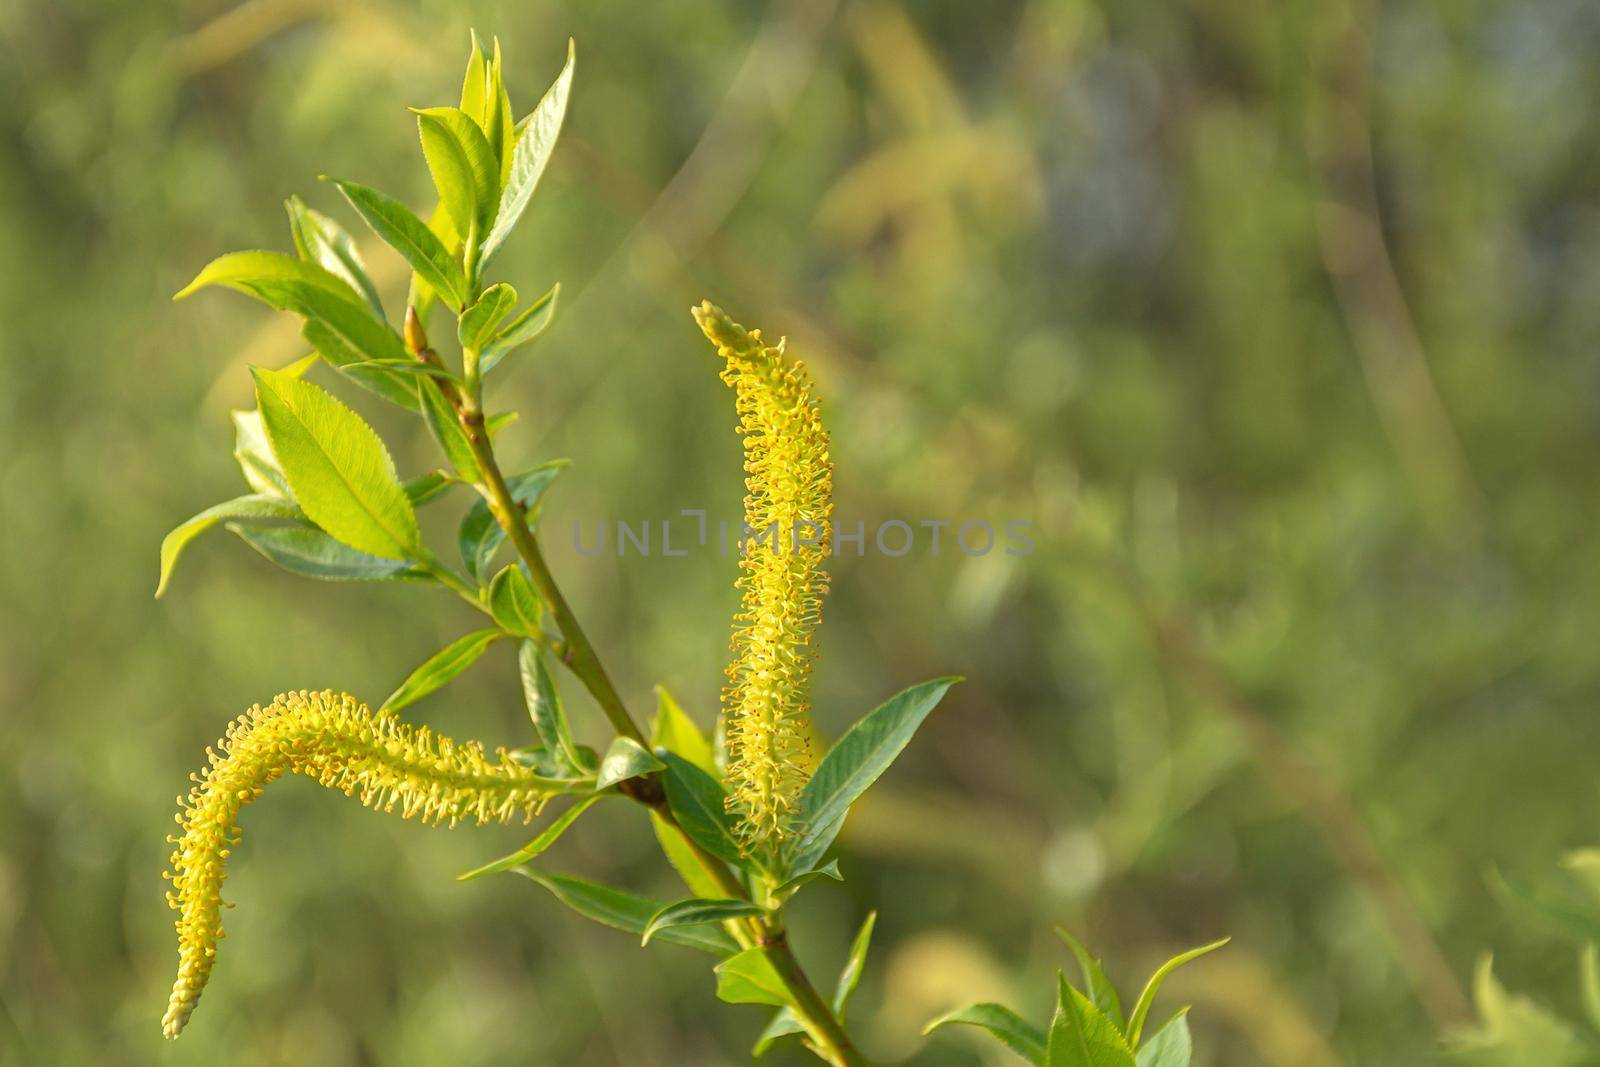 Yellow flowers of a herbaceous plant. Close-up, blurred, background. Stock photography.